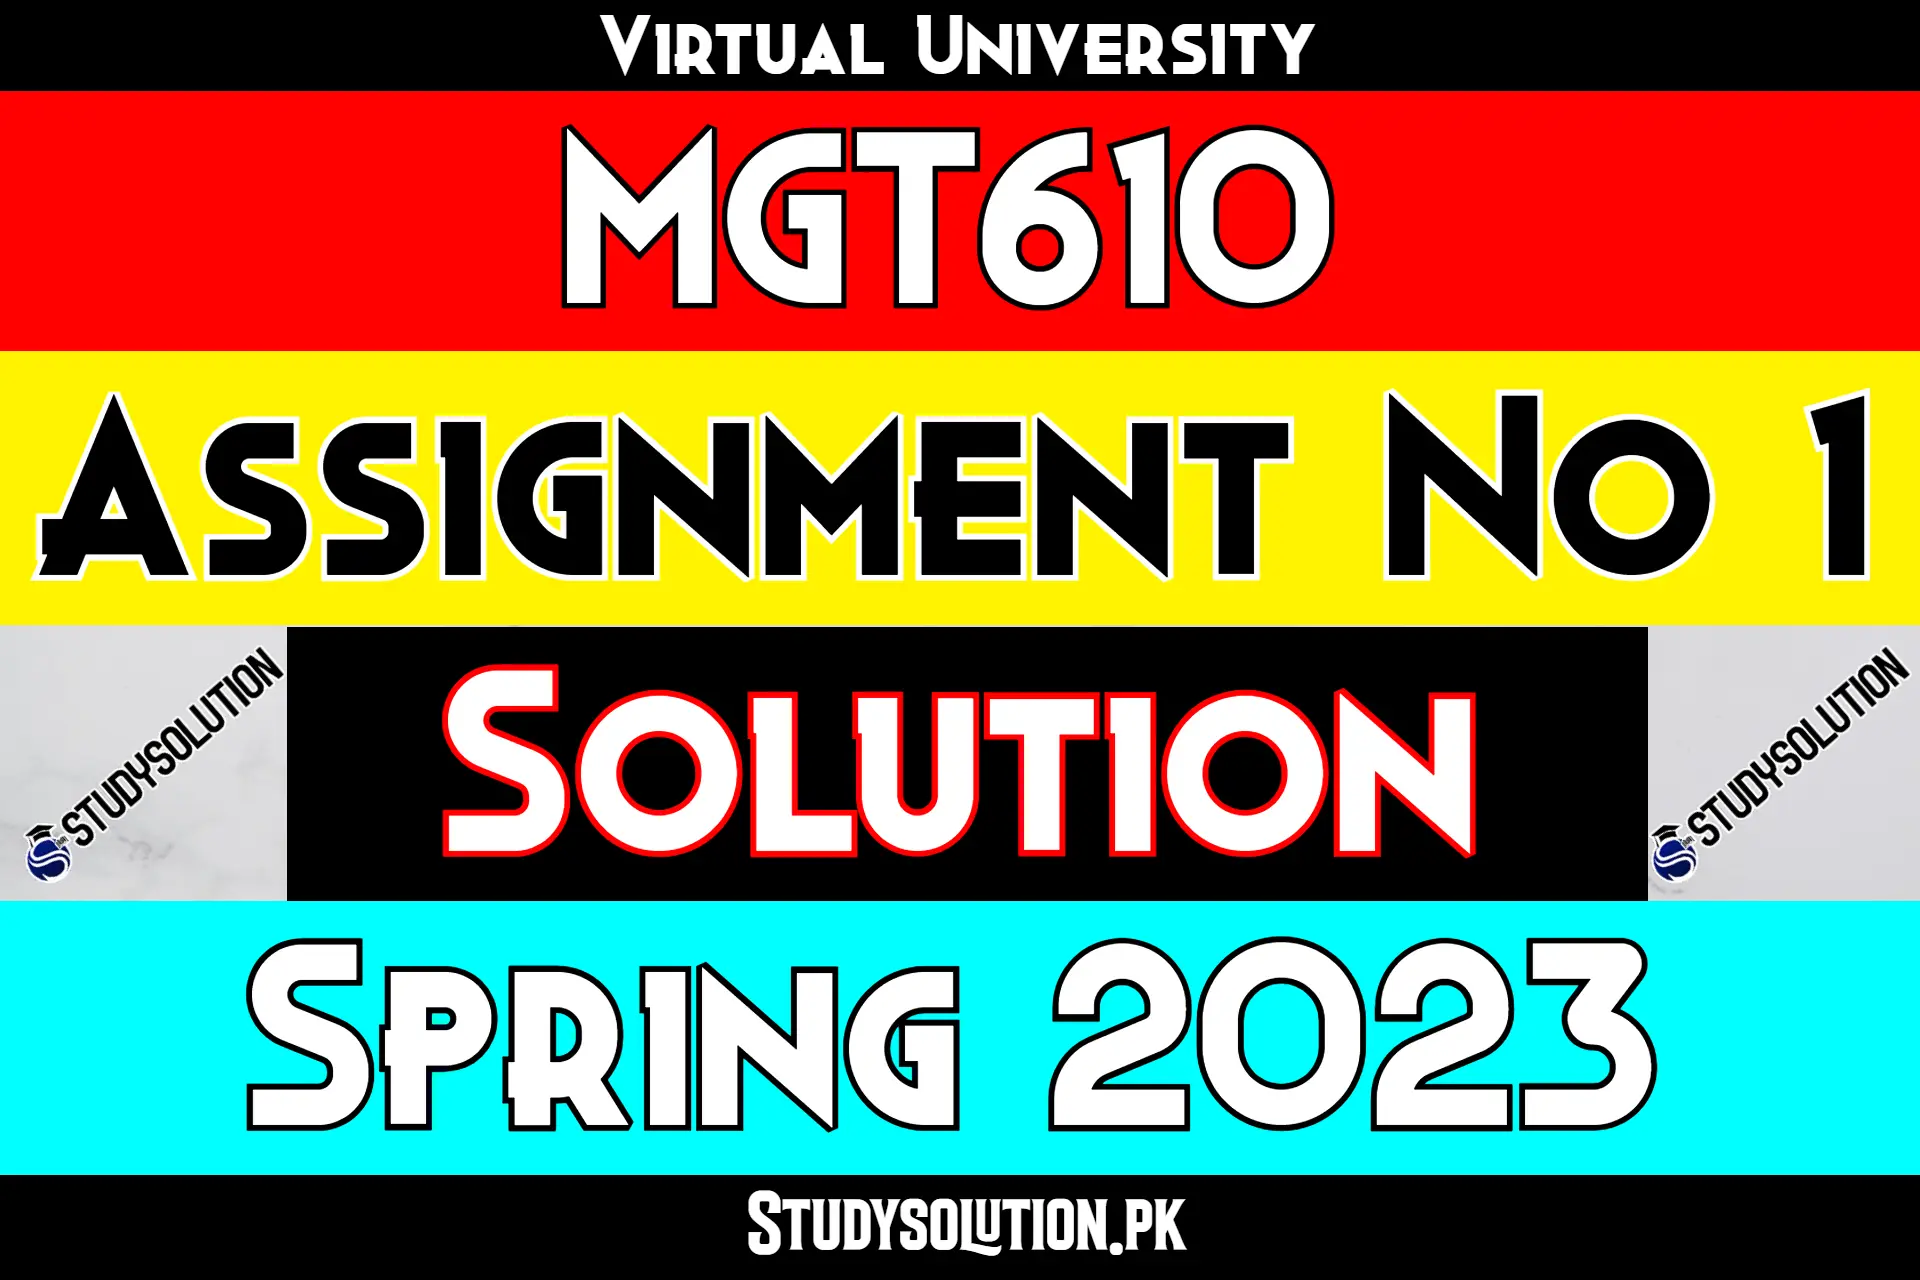 MGT610 Assignment No 1 Solution Spring 2023